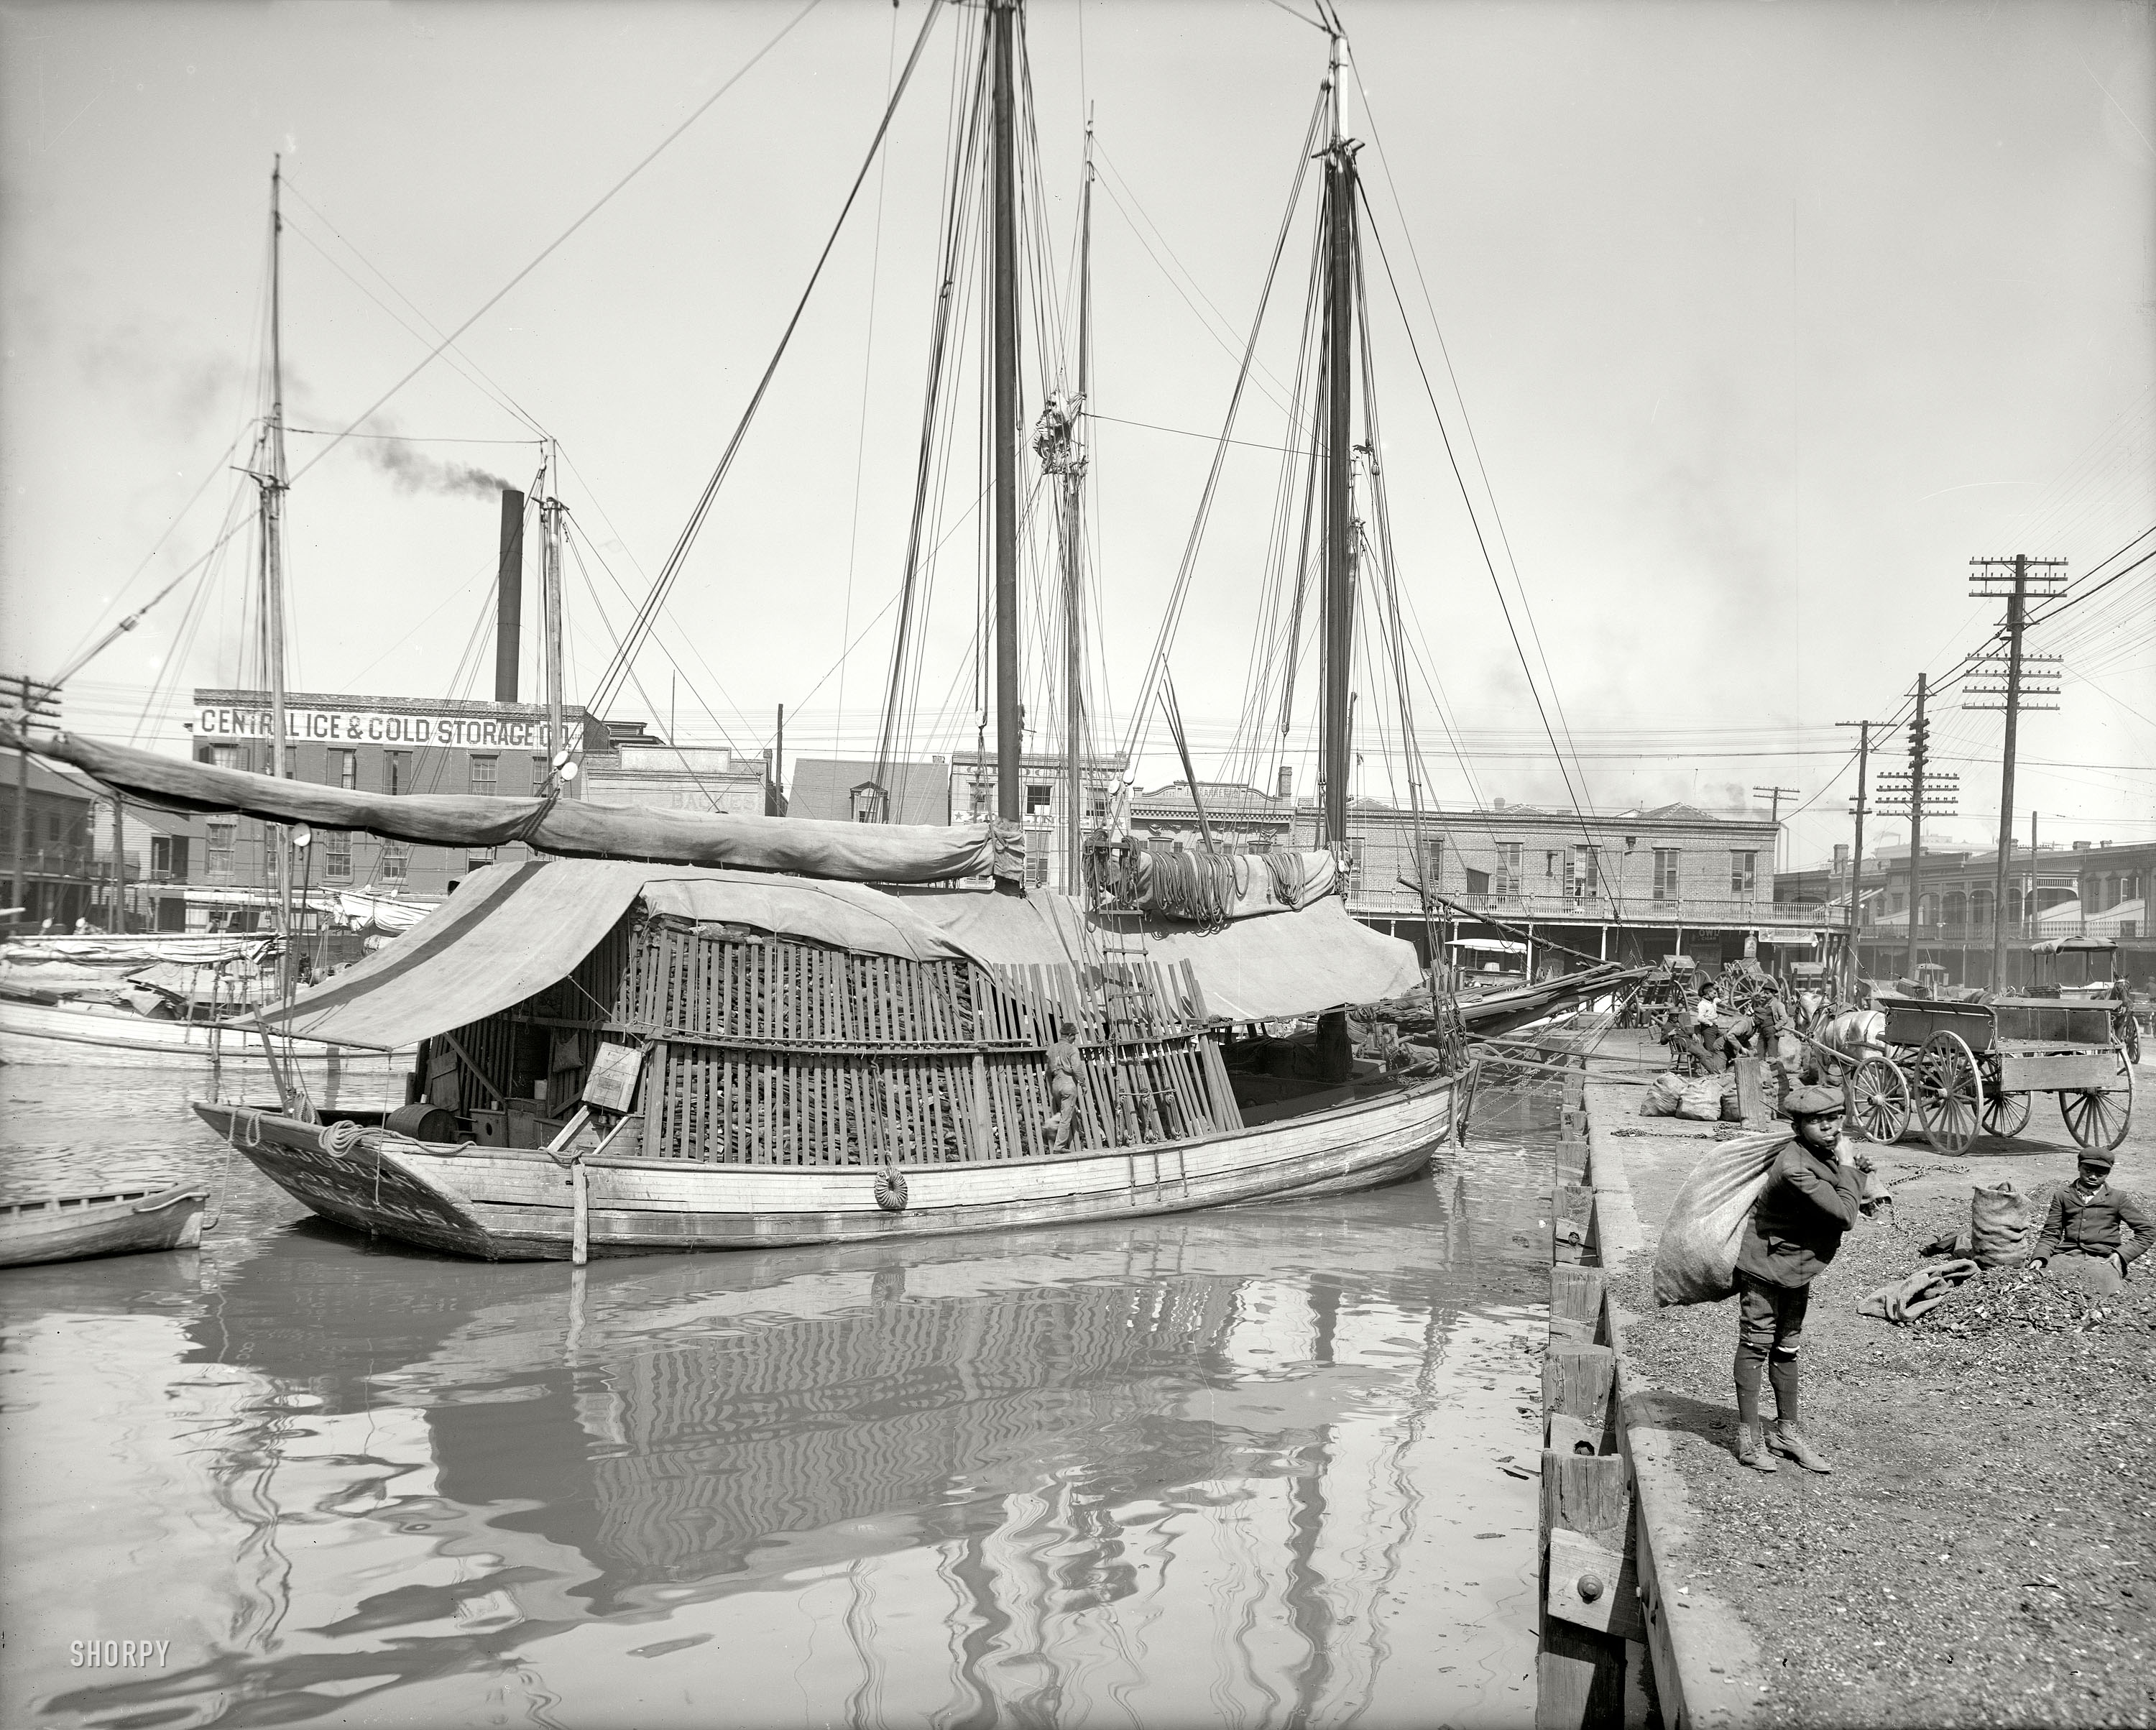 New Orleans circa 1906. "Charcoal lugger in the Old Basin." 8x10 inch dry plate glass negative, Detroit Publishing Company. View full size.